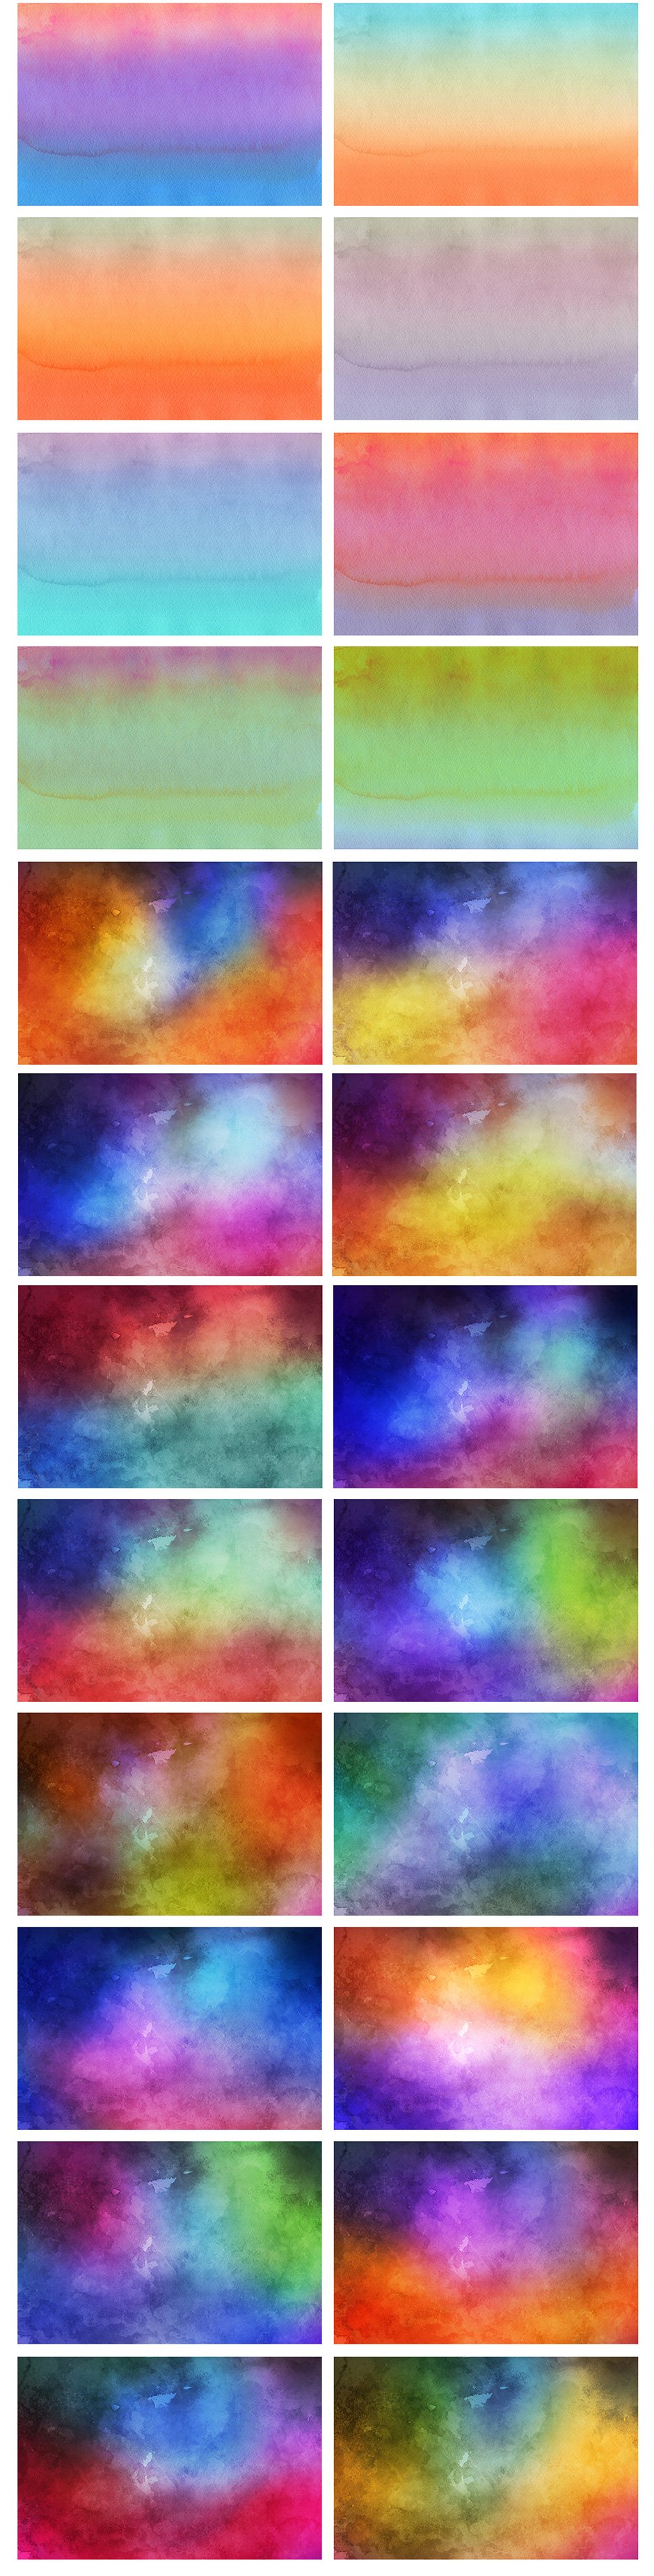 48 Watercolor Backgrounds